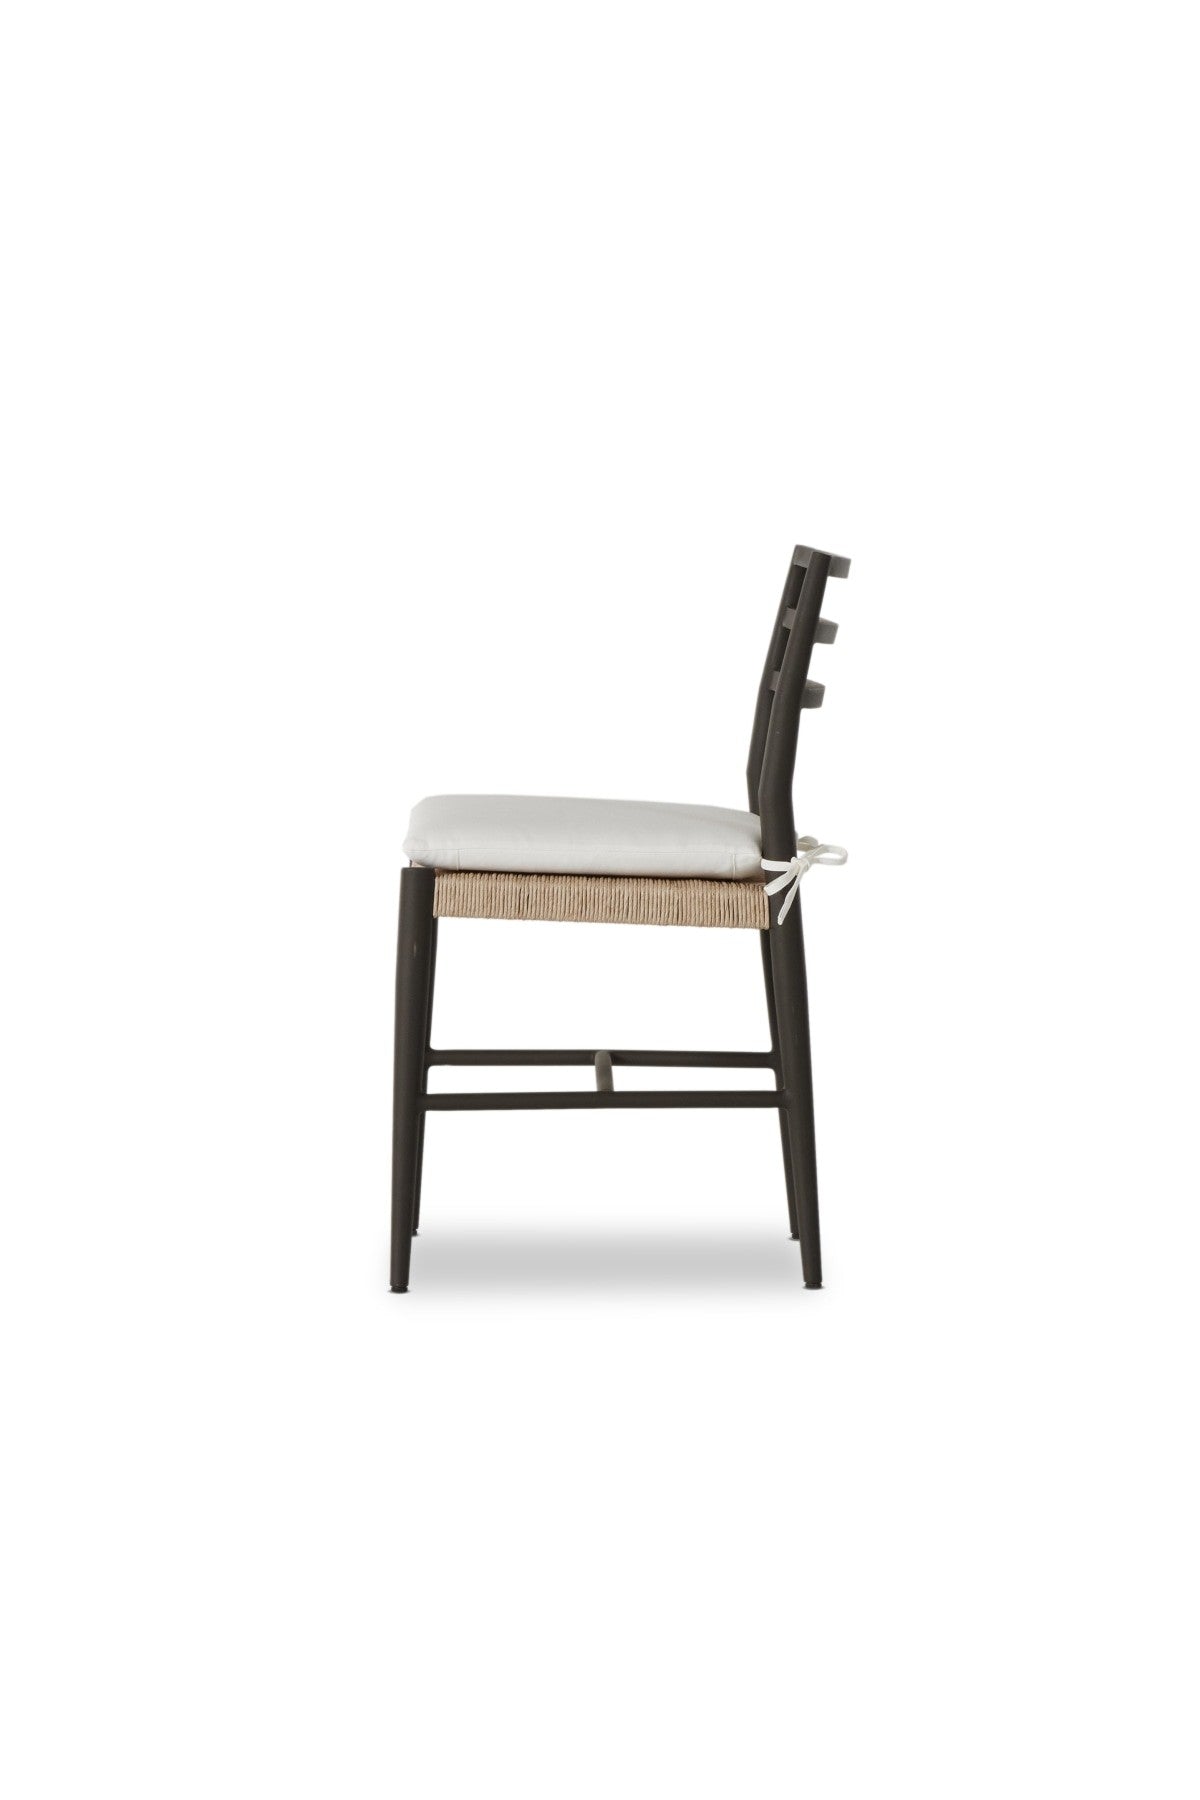 Glenny Outdoor Dining Chair